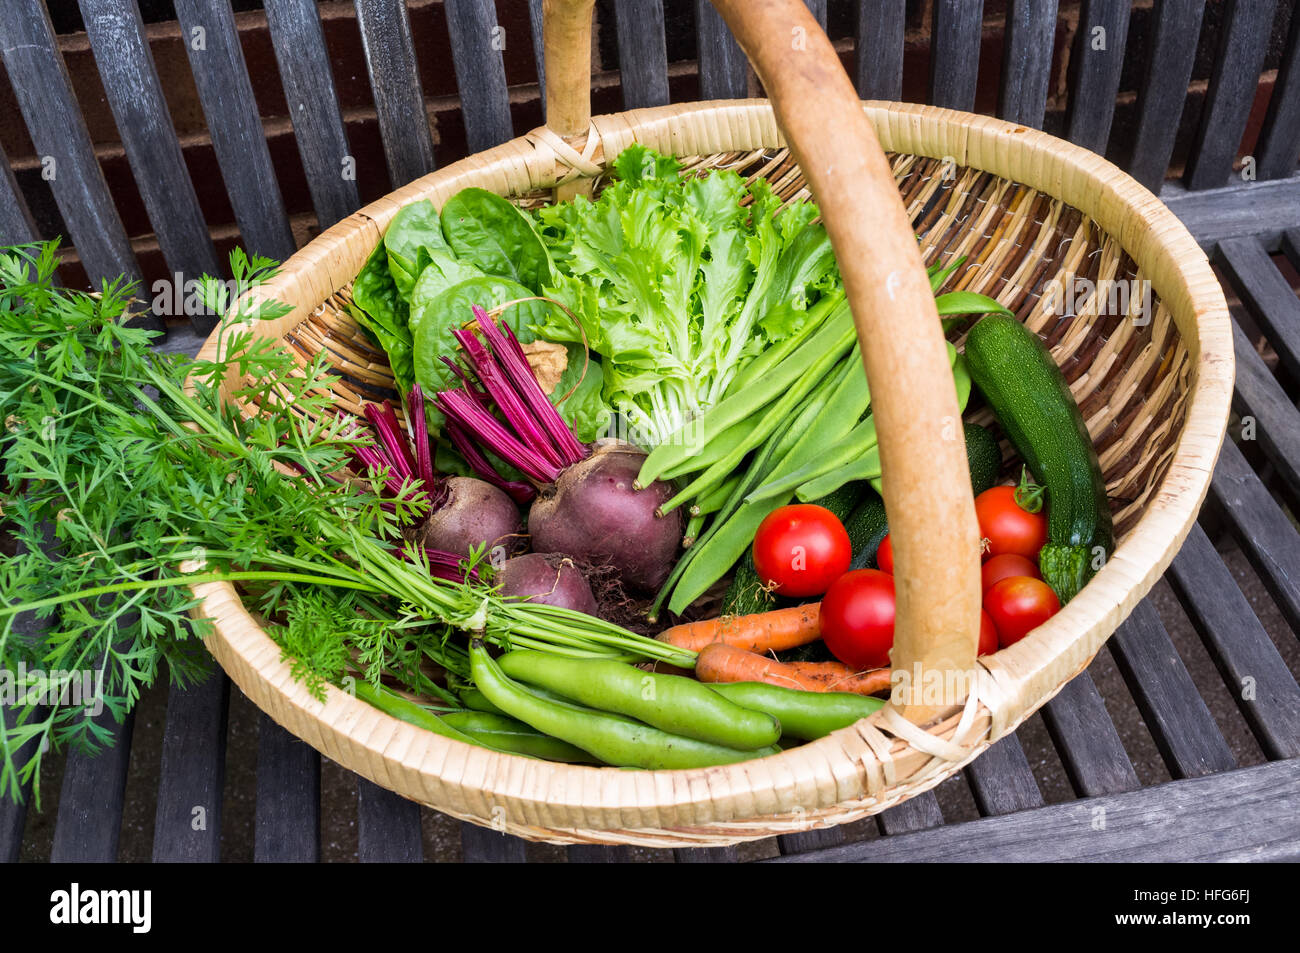 Basket of fresh organic vegetables with lettuce carrots beetroot tomatoes beans and courgettes Stock Photo